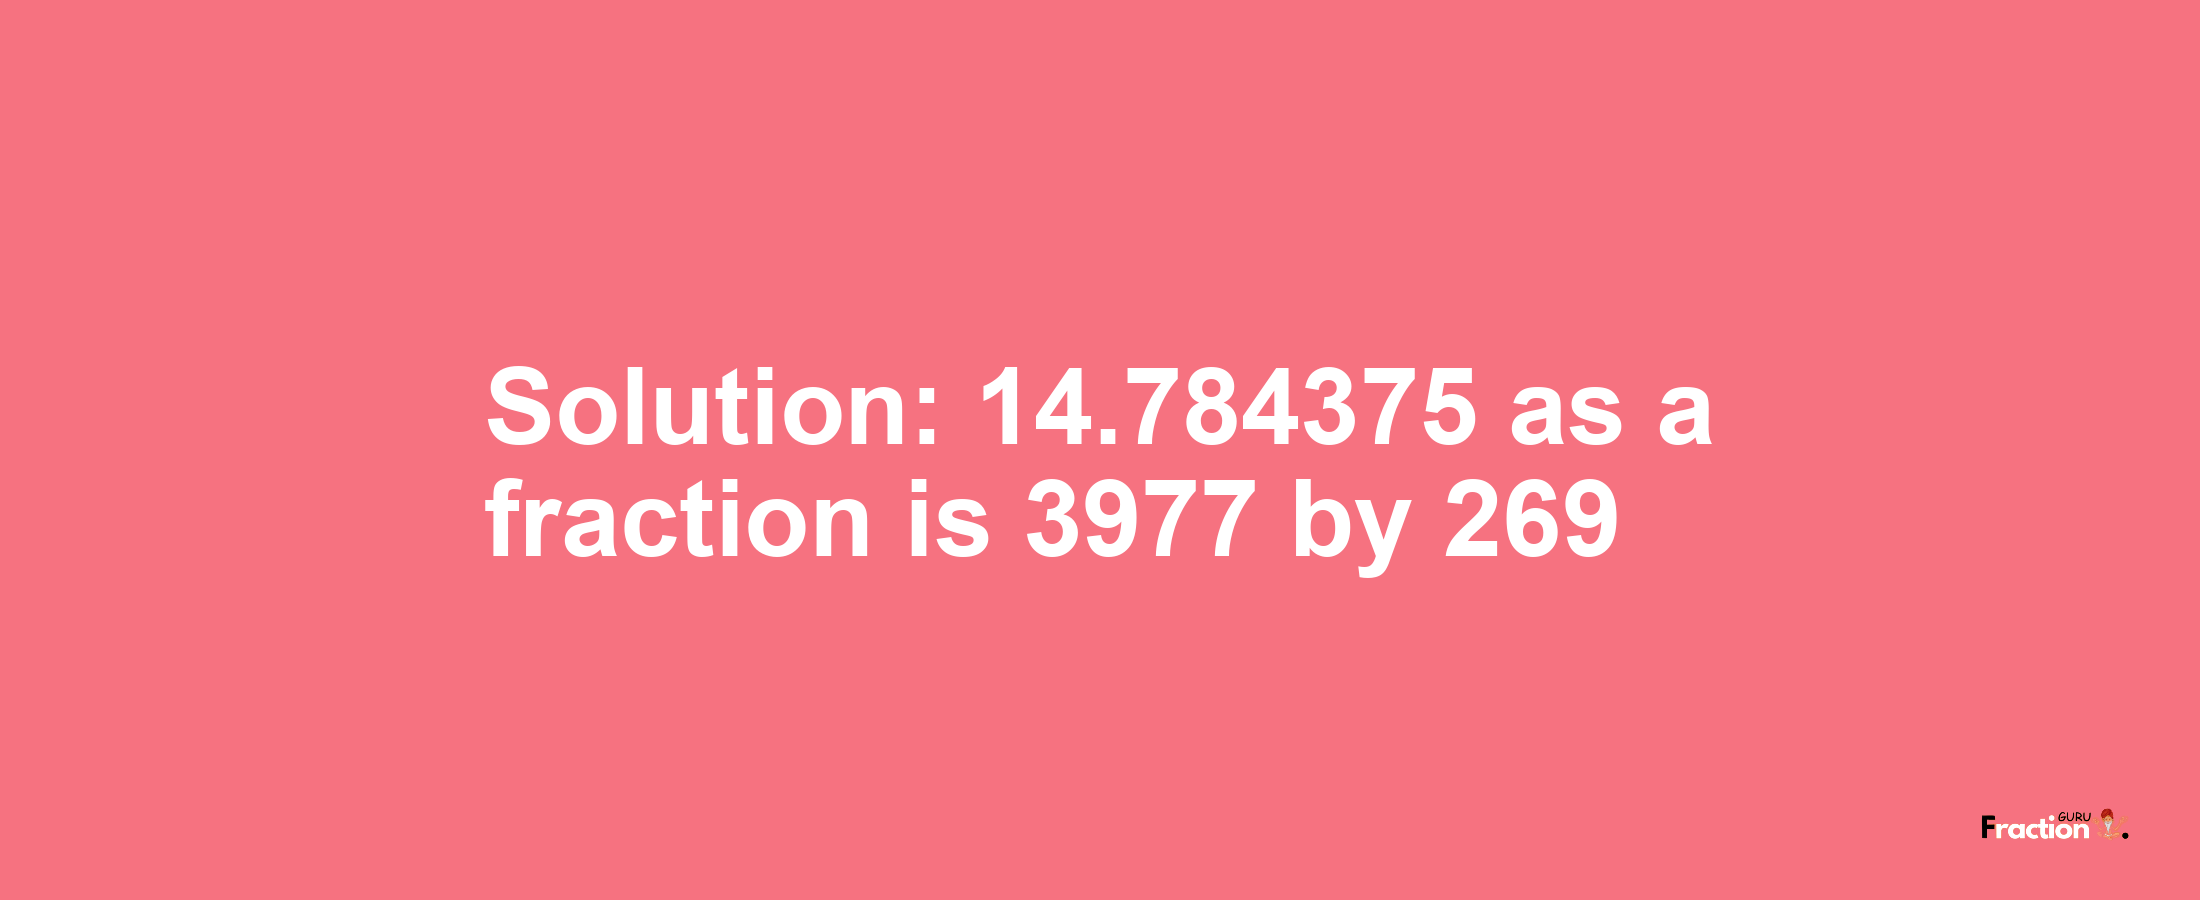 Solution:14.784375 as a fraction is 3977/269